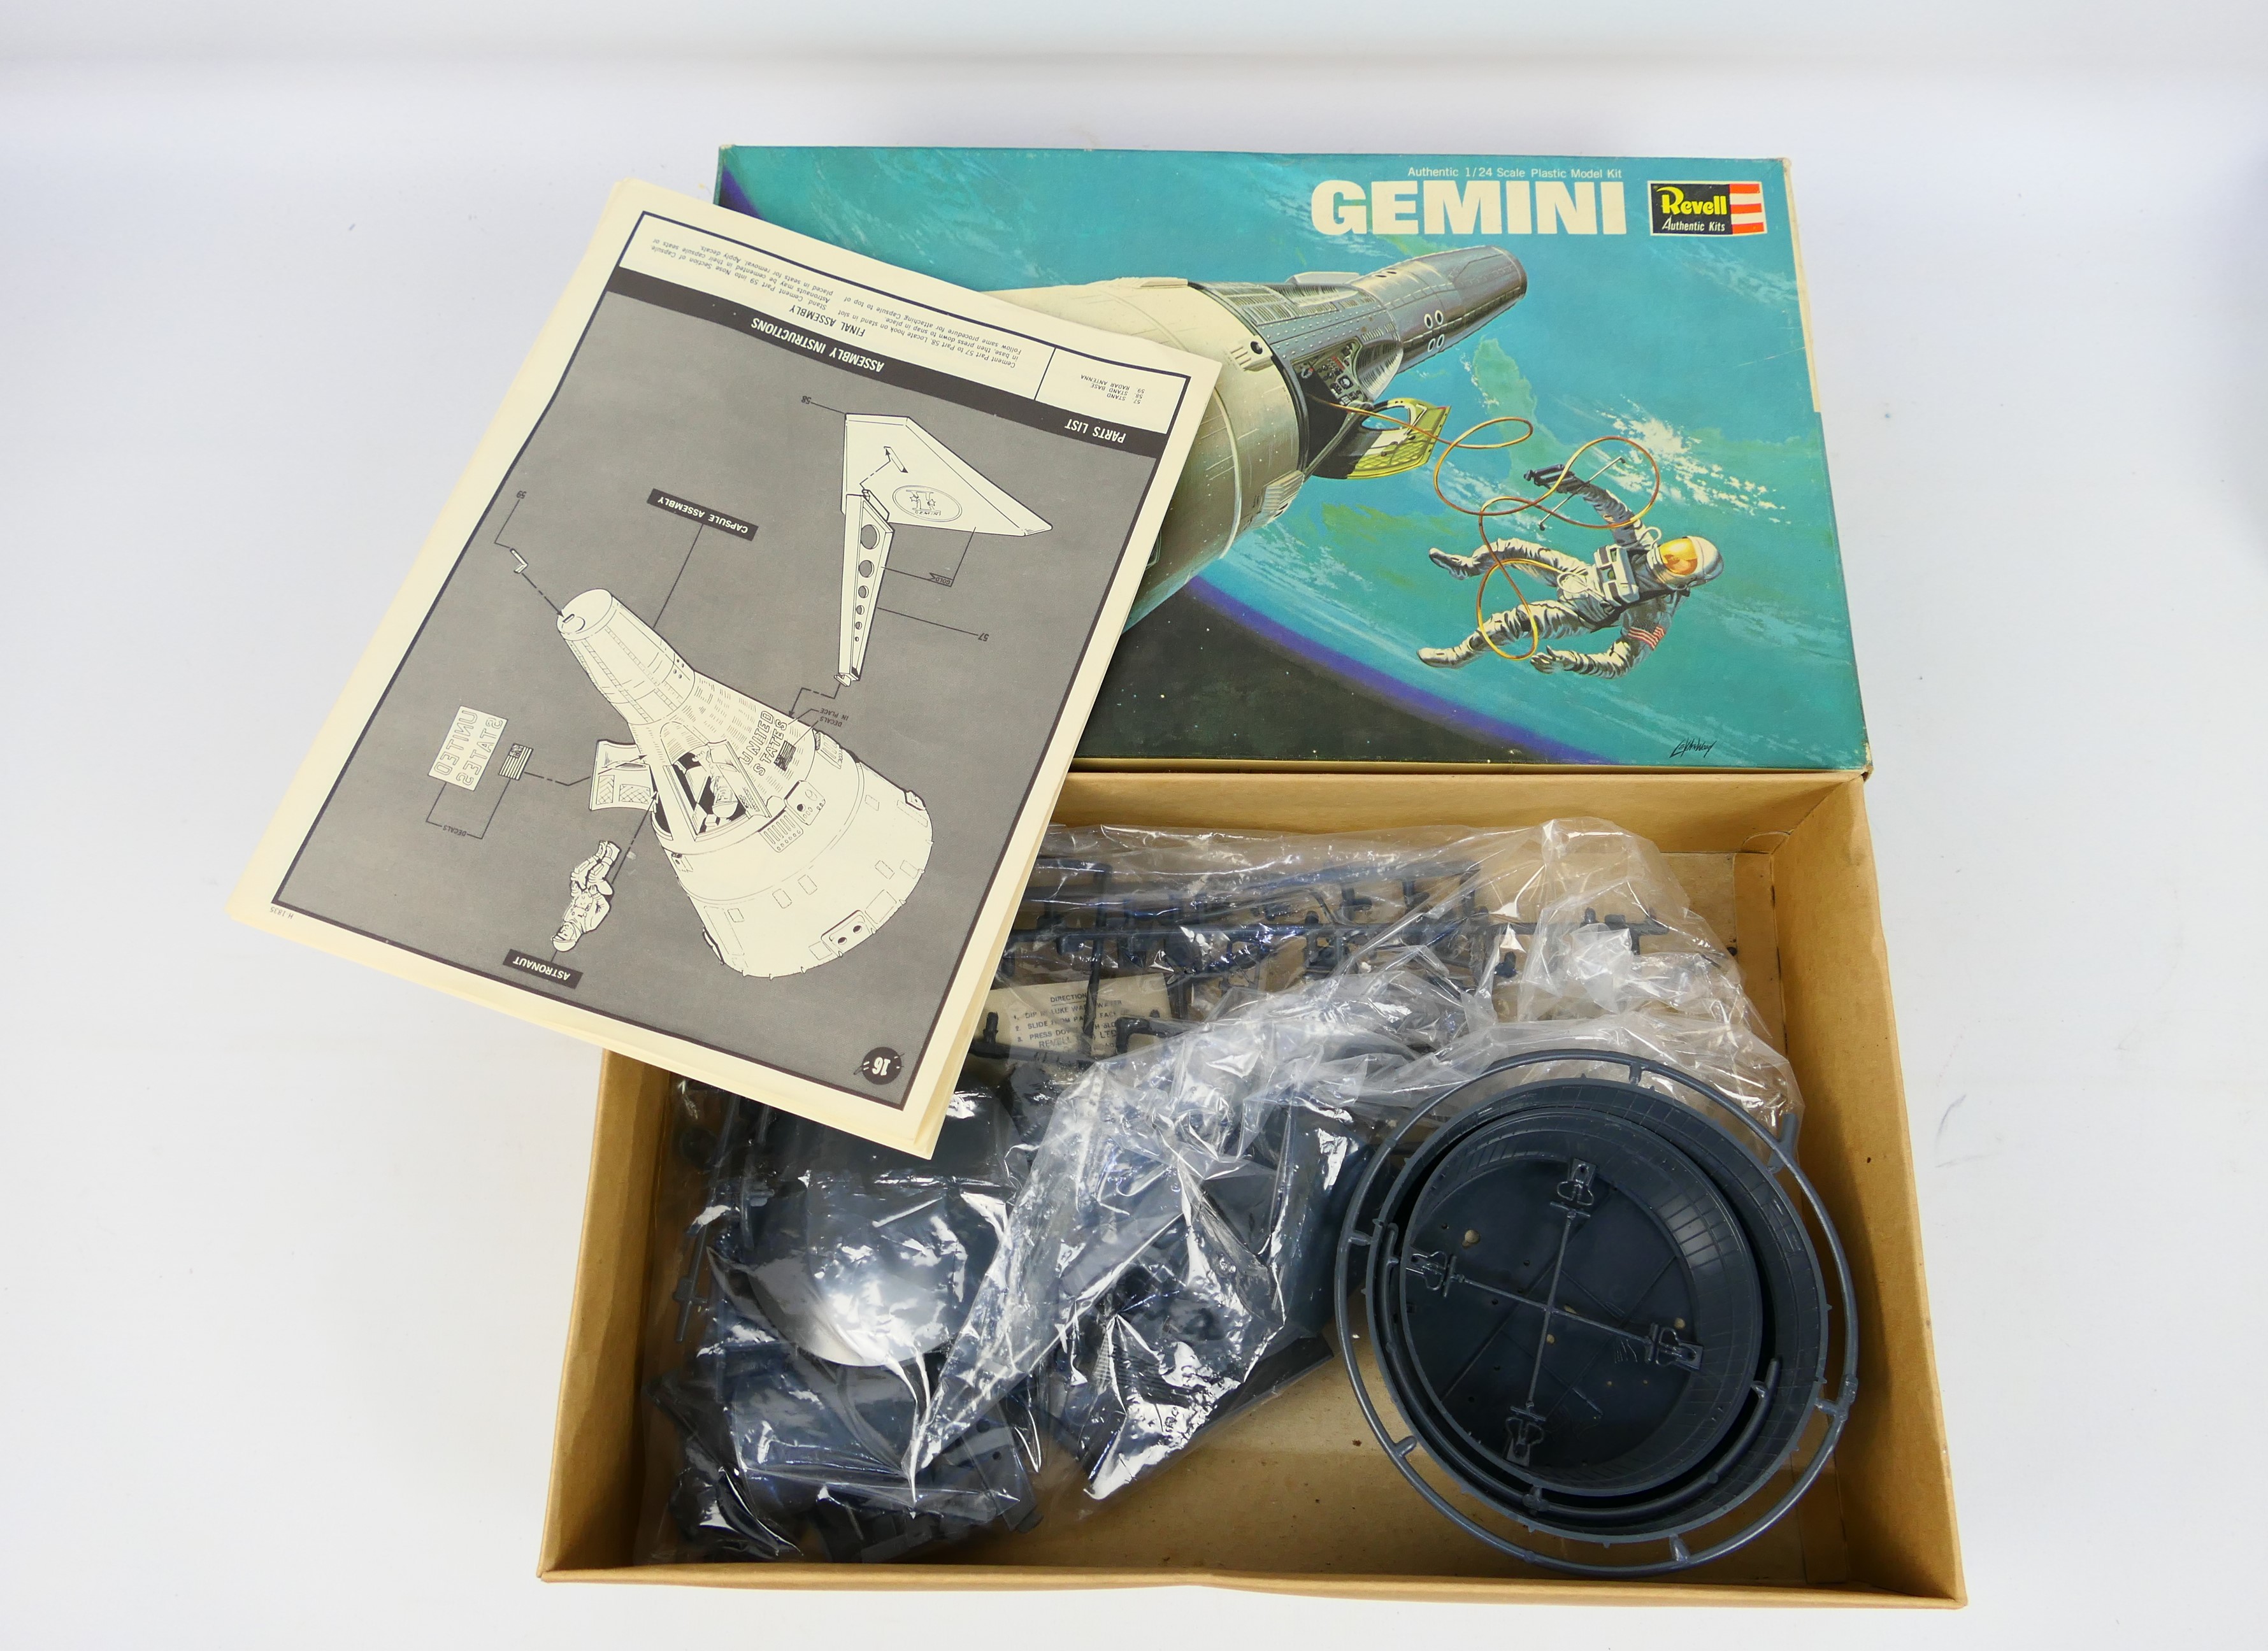 Airfix - Revell - Matchbox - 4 x vintage model kits including Gemini space capsule in 1:24 scale # - Image 7 of 12